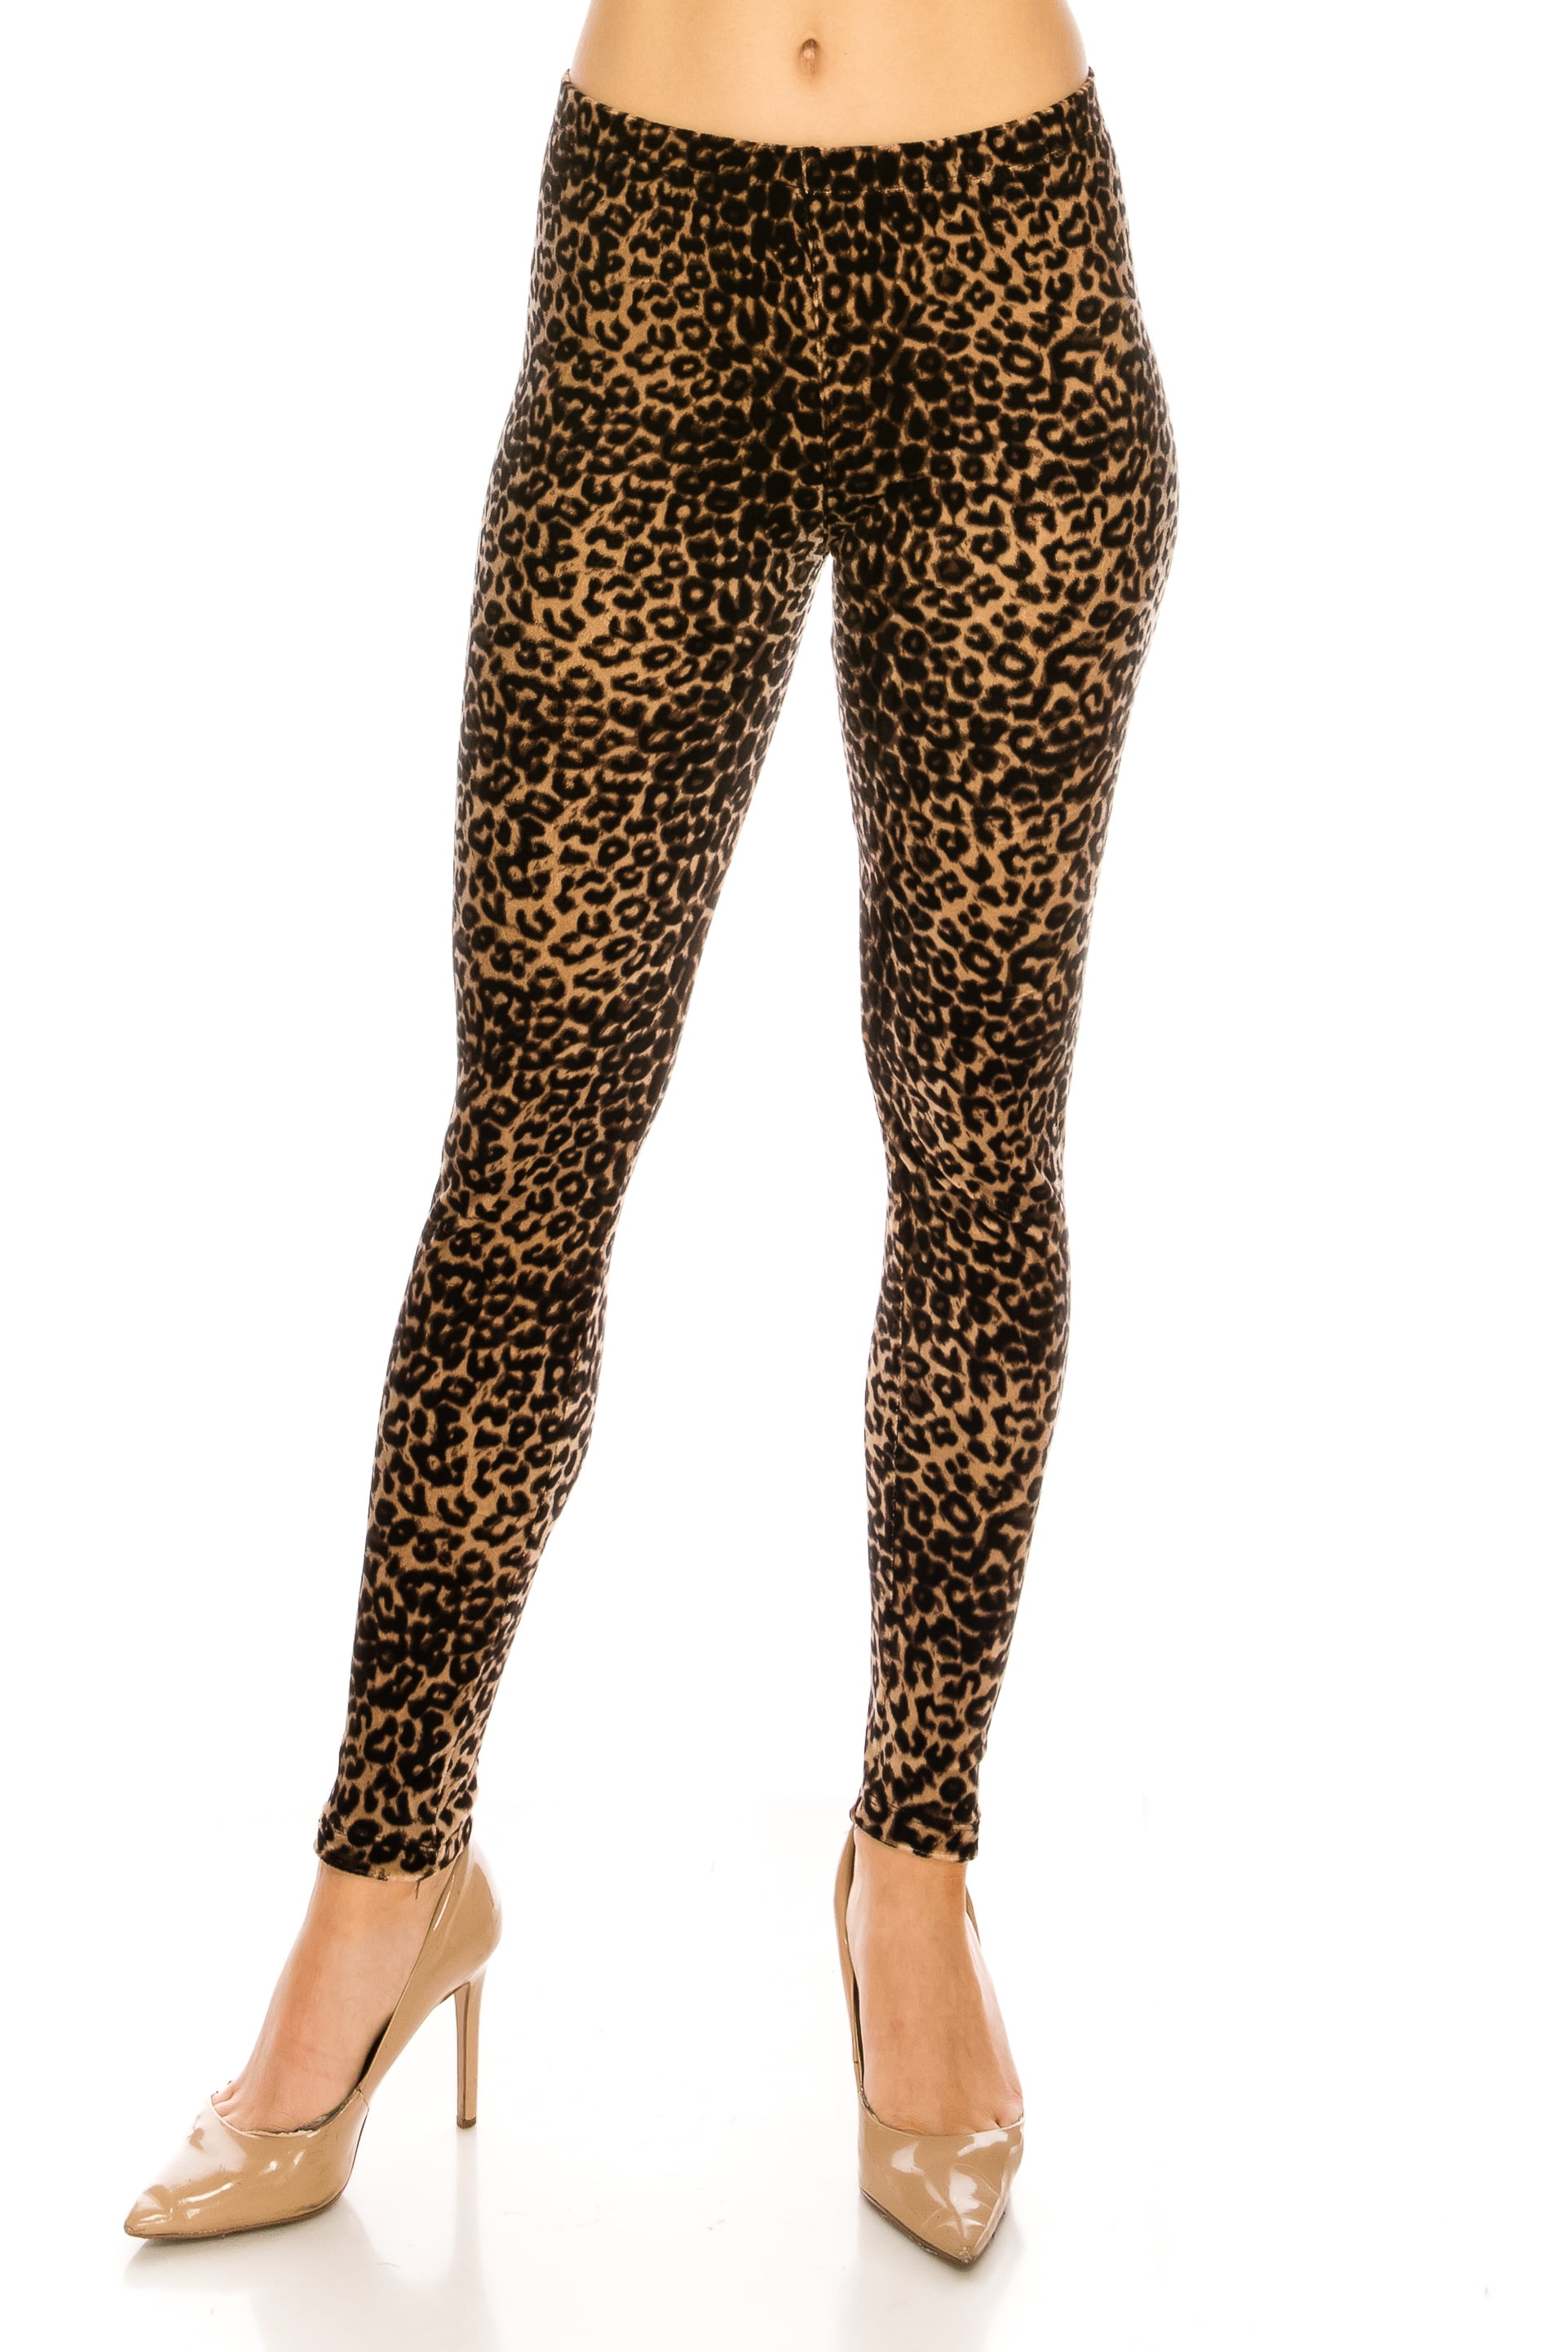 WS Ladies Velour for Cold Weather Printed Stretch Leggings Sassy